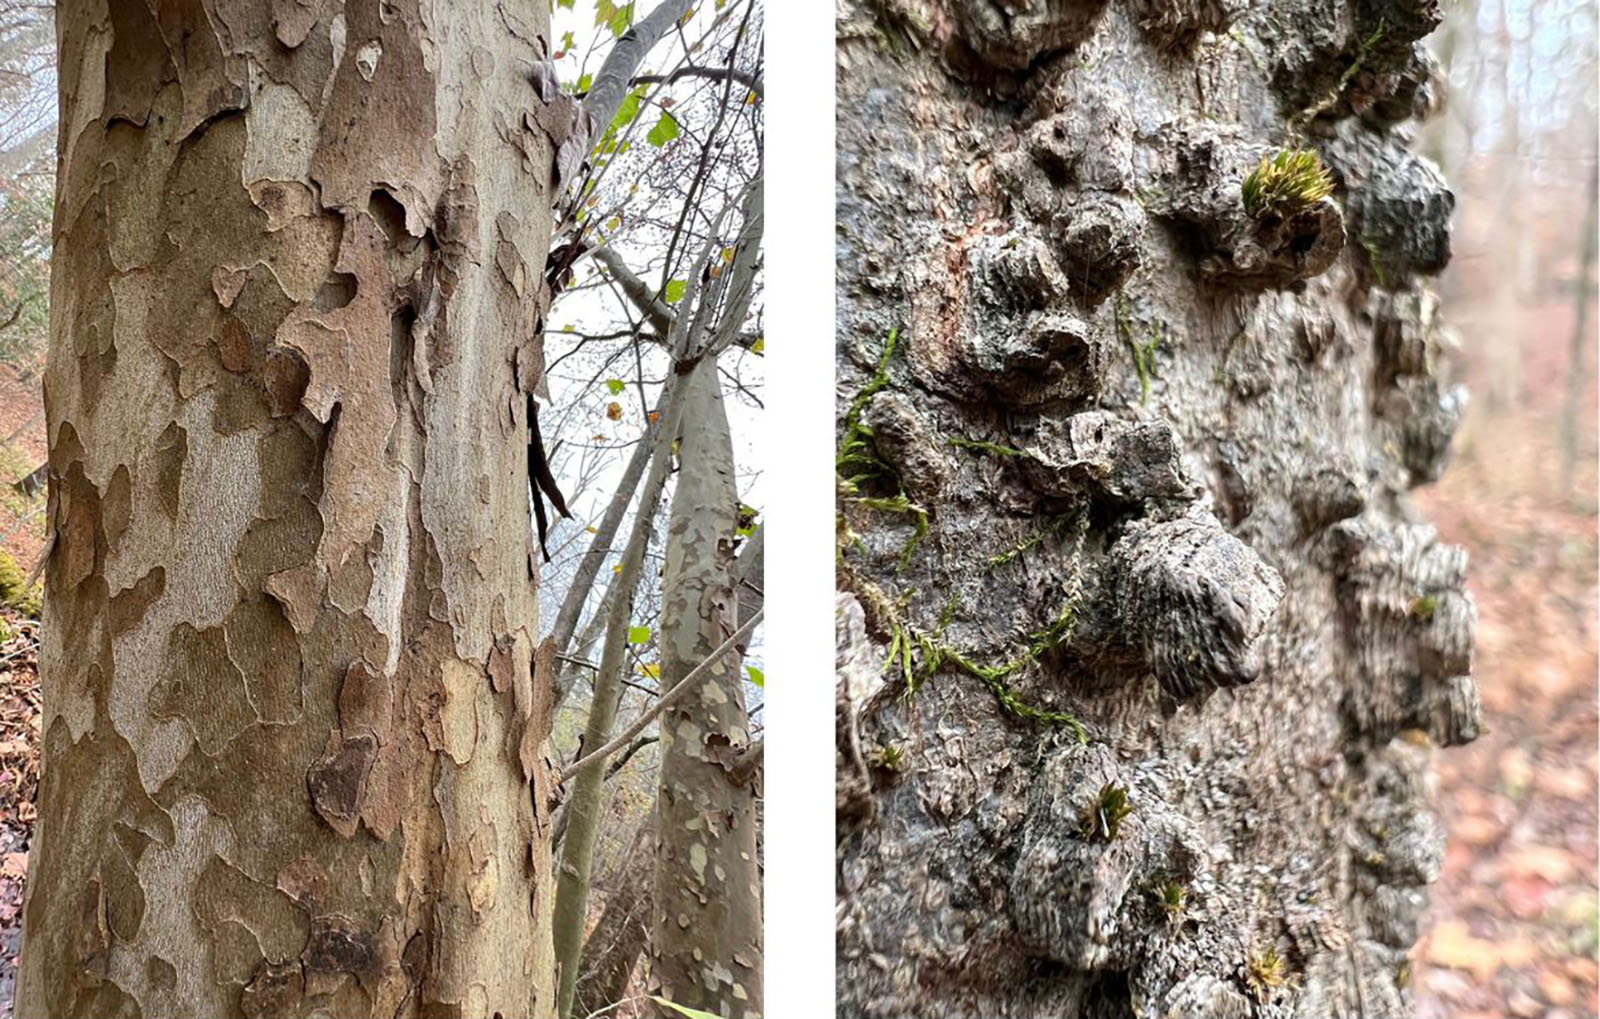 Two photos side by side of close-ups of tree bark. The one on the left is patchy and flaking, while the one on the right has bumpy ridges.